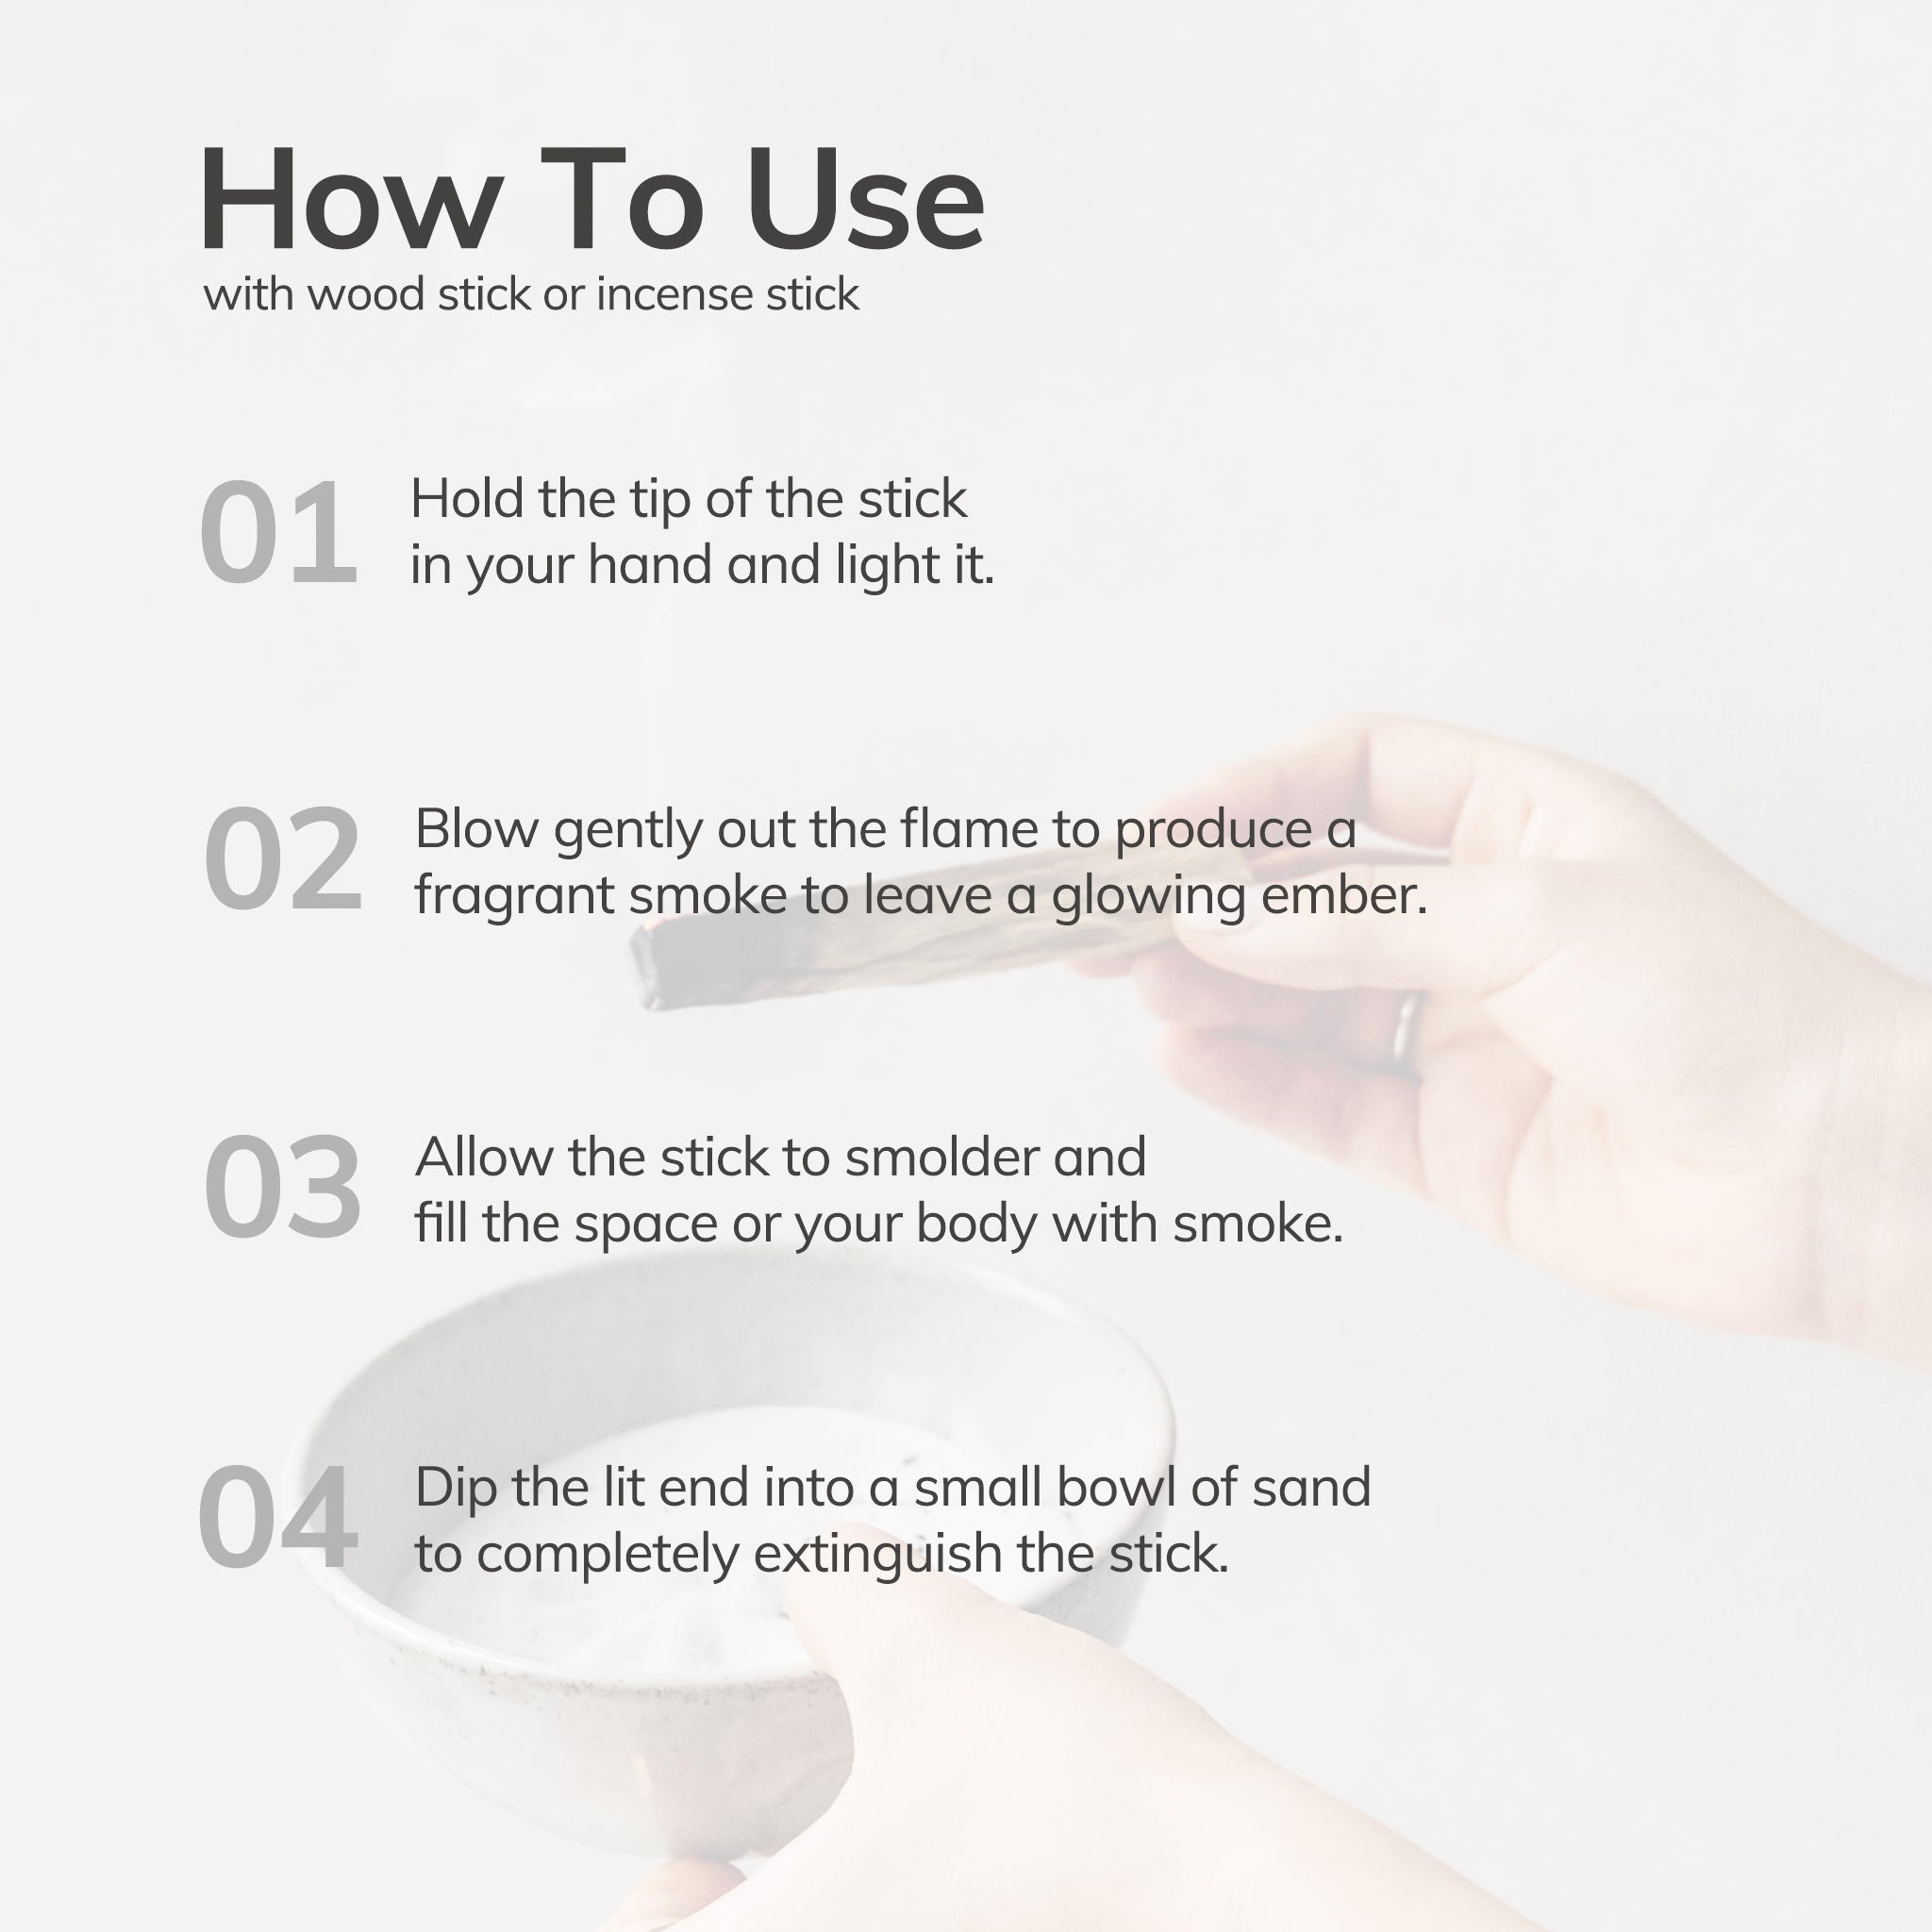 Step by step telling how to use with smudge stick.